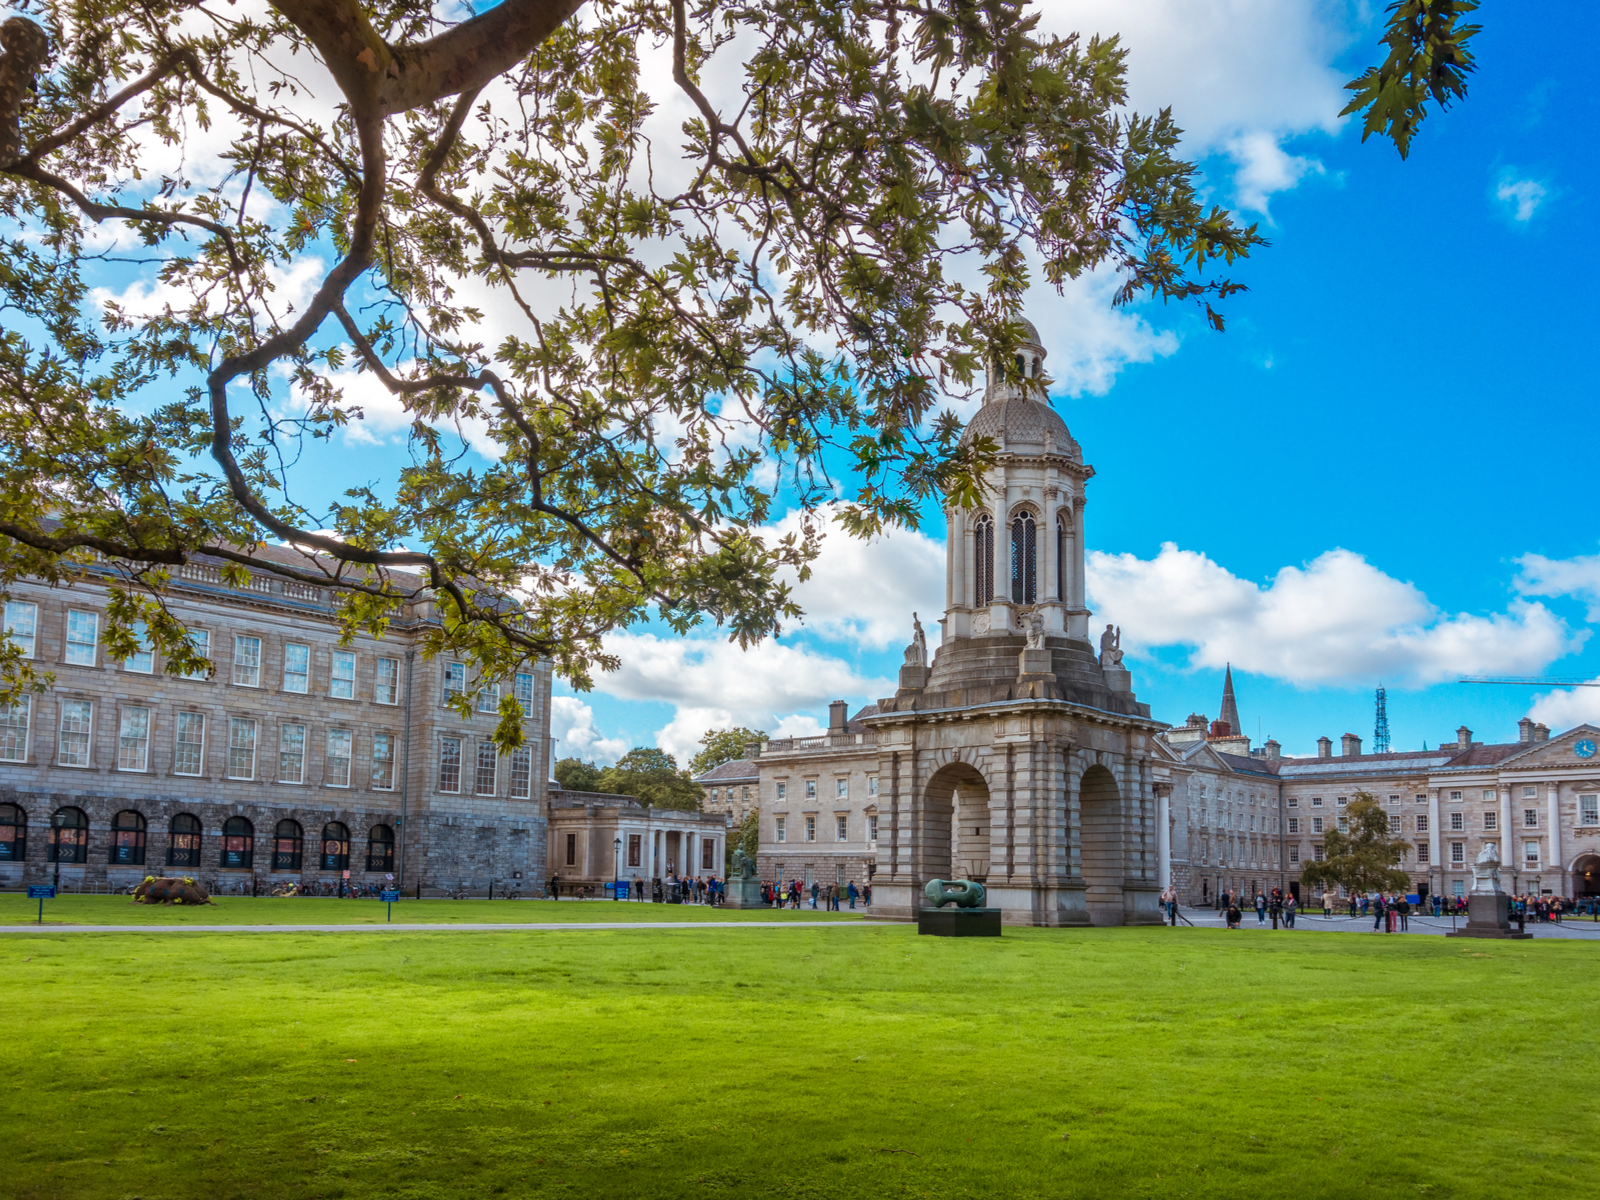 Students and parents gathered in front of the Campanile inside Trinity College Campus in Dublin, with green trimmed lawn on its rear, considered as one of the best universities in Ireland